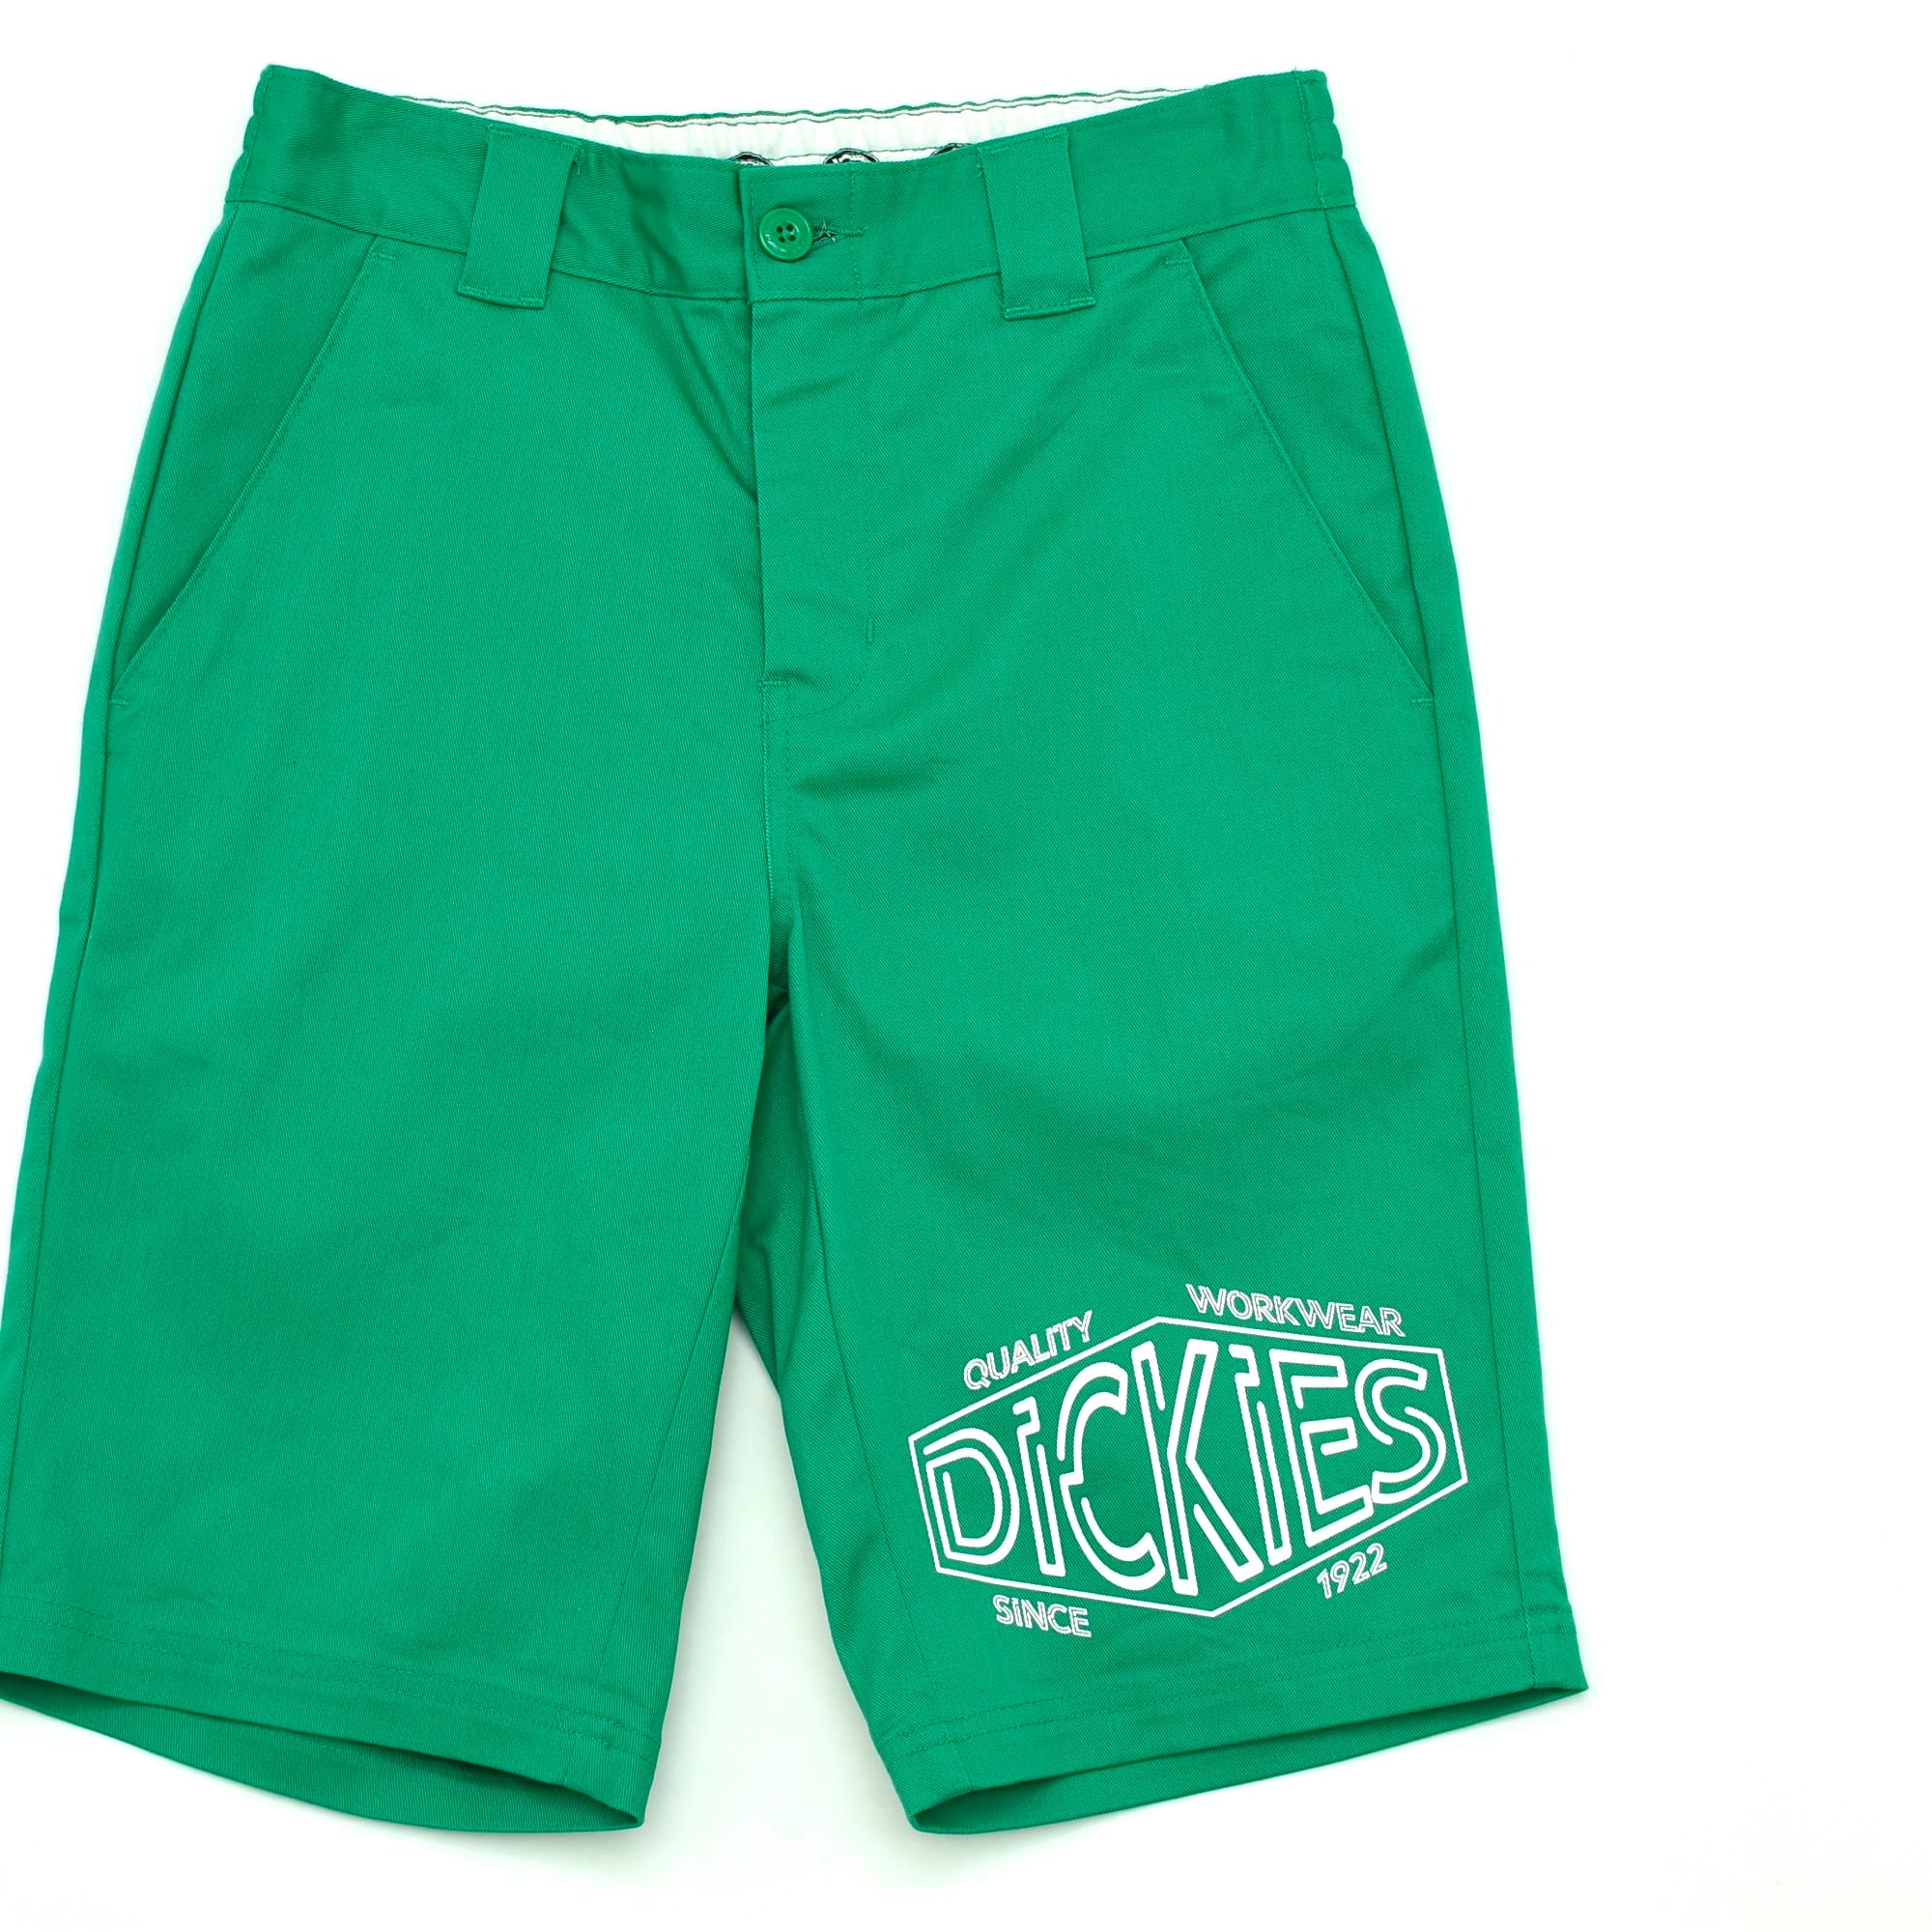 Dickies color twill shorts